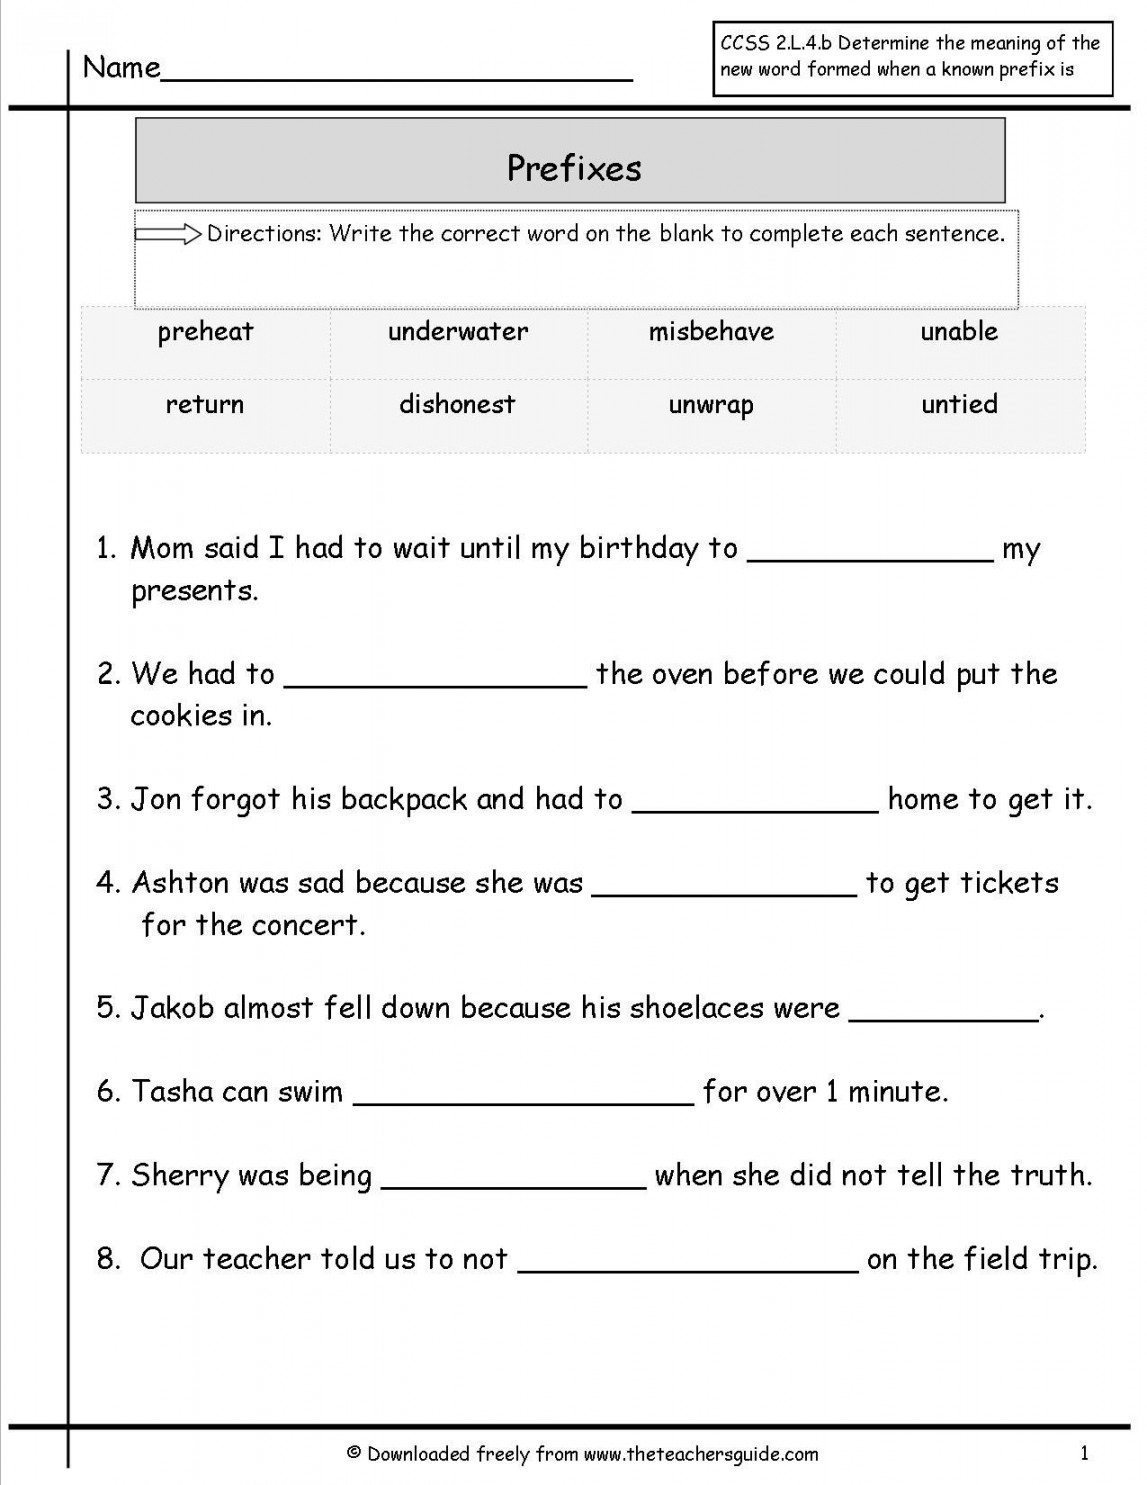 Free Prefixes and Suffixes Worksheets from The Teacher